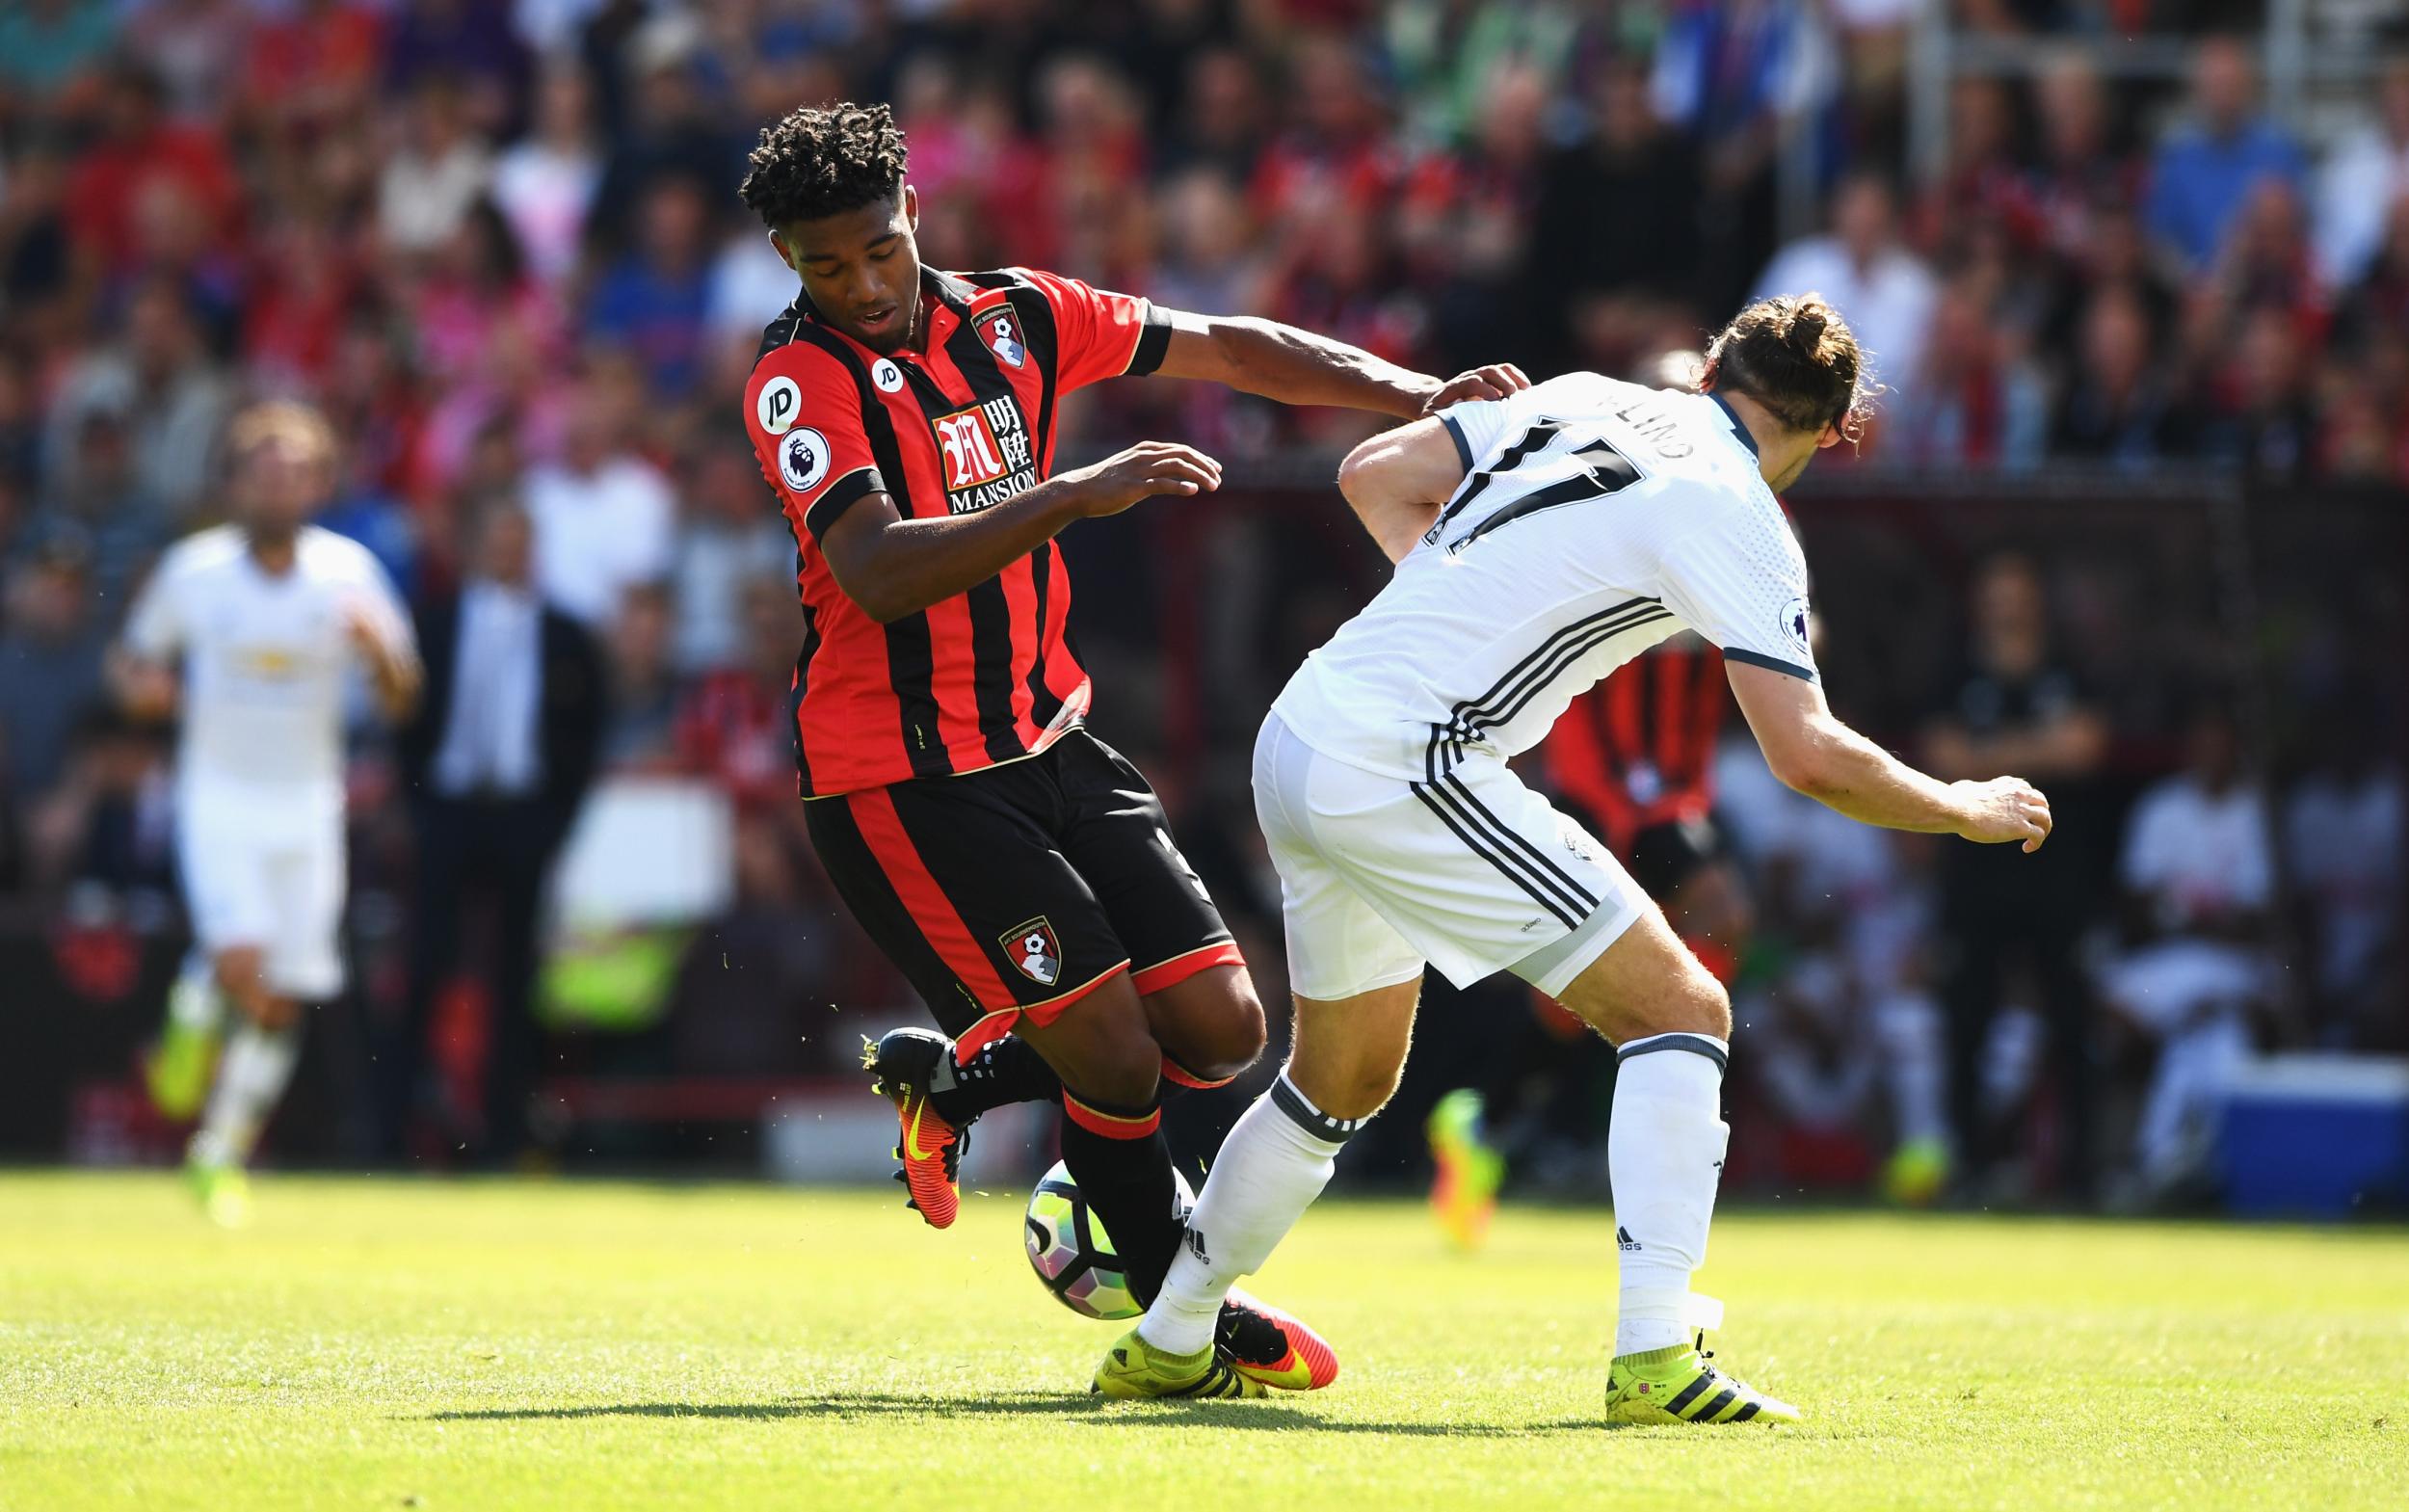 Jordan Ibe made his Premier League debut for Bournemouth